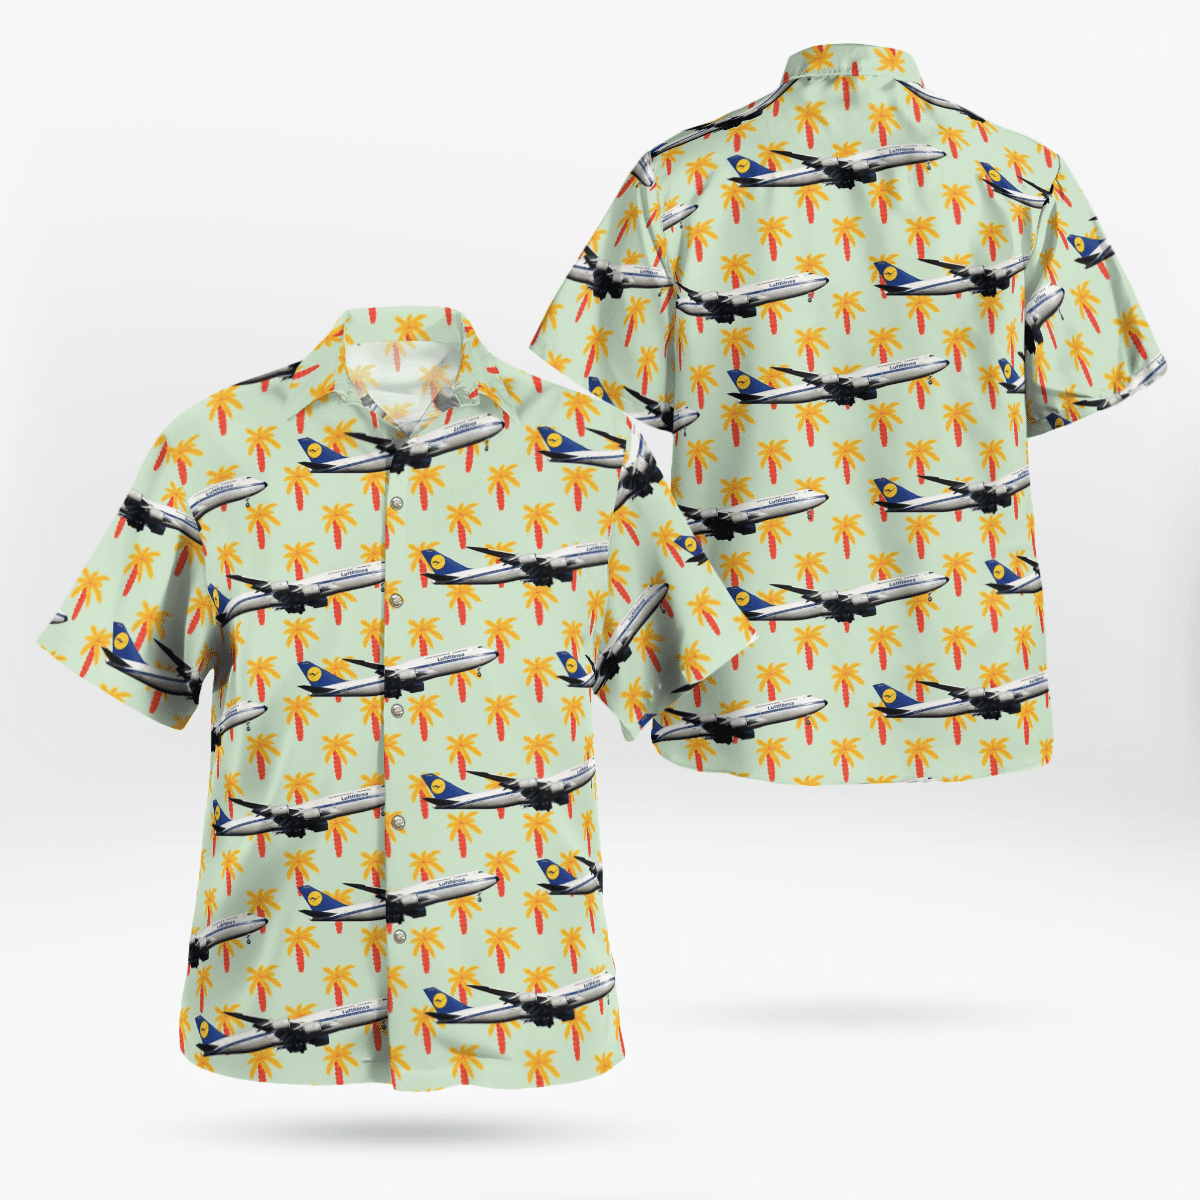 If you are in need of a new summertime look, pick up this Hawaiian shirt 102